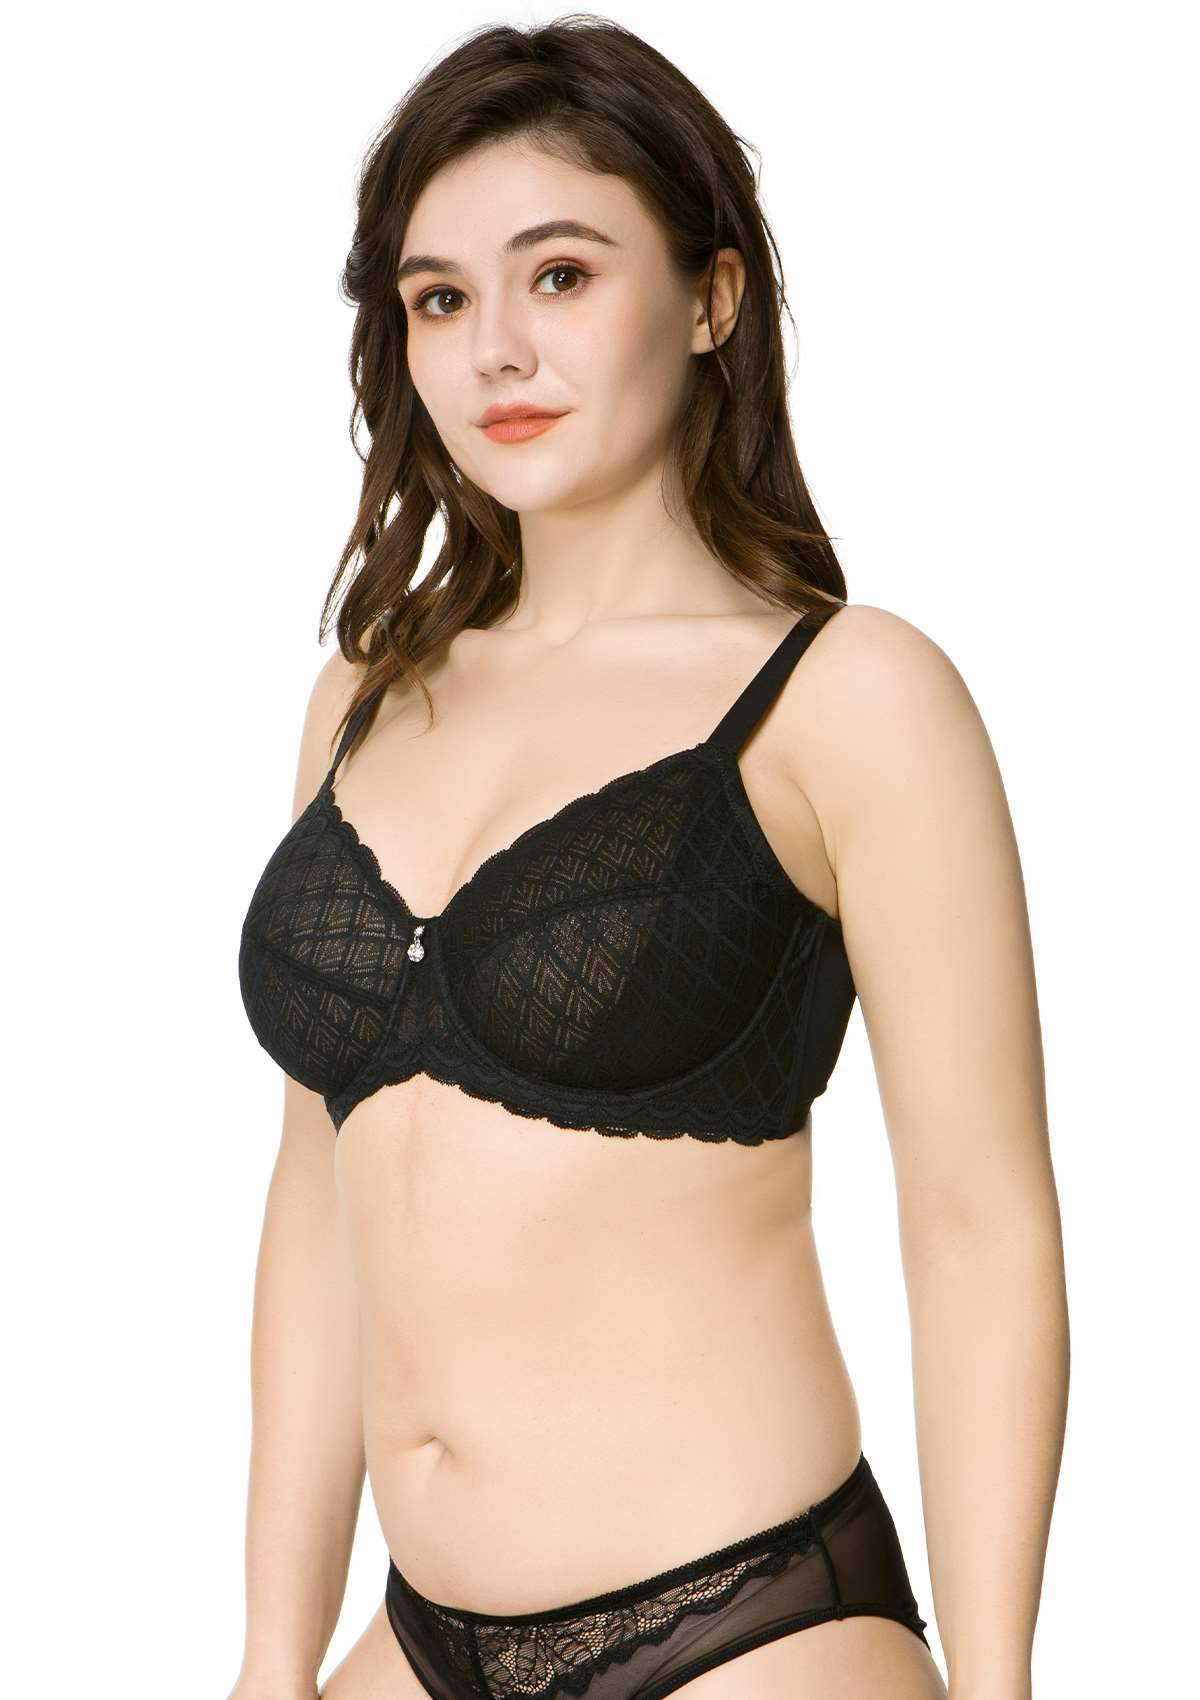 HSIA Plaid Full-Coverage Bra: Soft Bra With Thick Straps - Light Pink / 34 / D